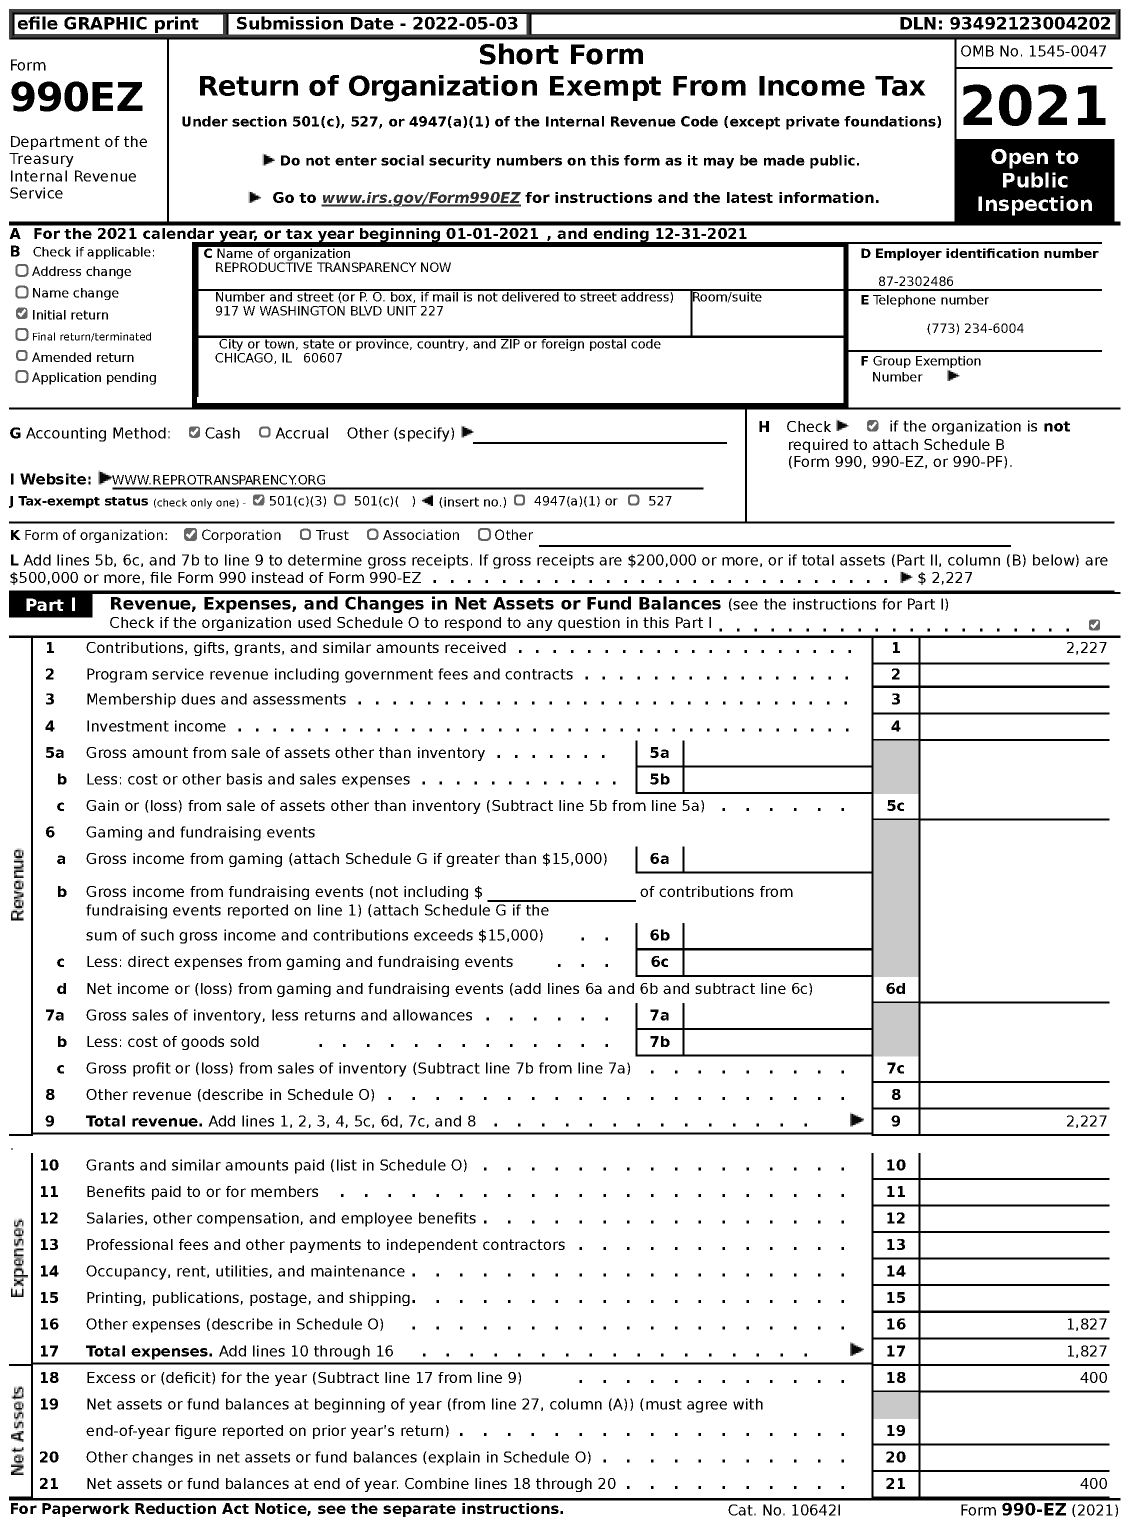 Image of first page of 2021 Form 990EZ for Reproductive Transparency Now